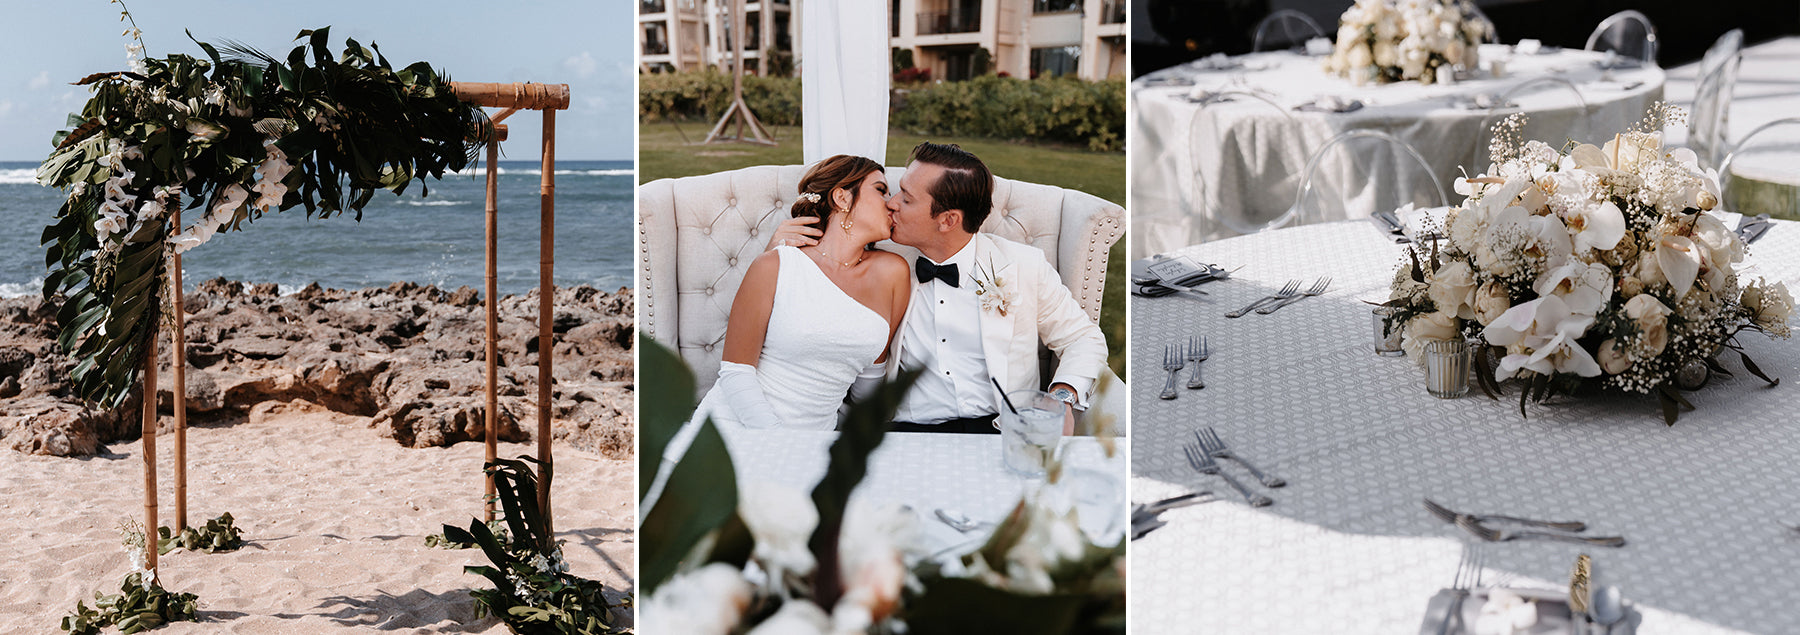 Montage of a wedding at Turtle Bay, Hawaii